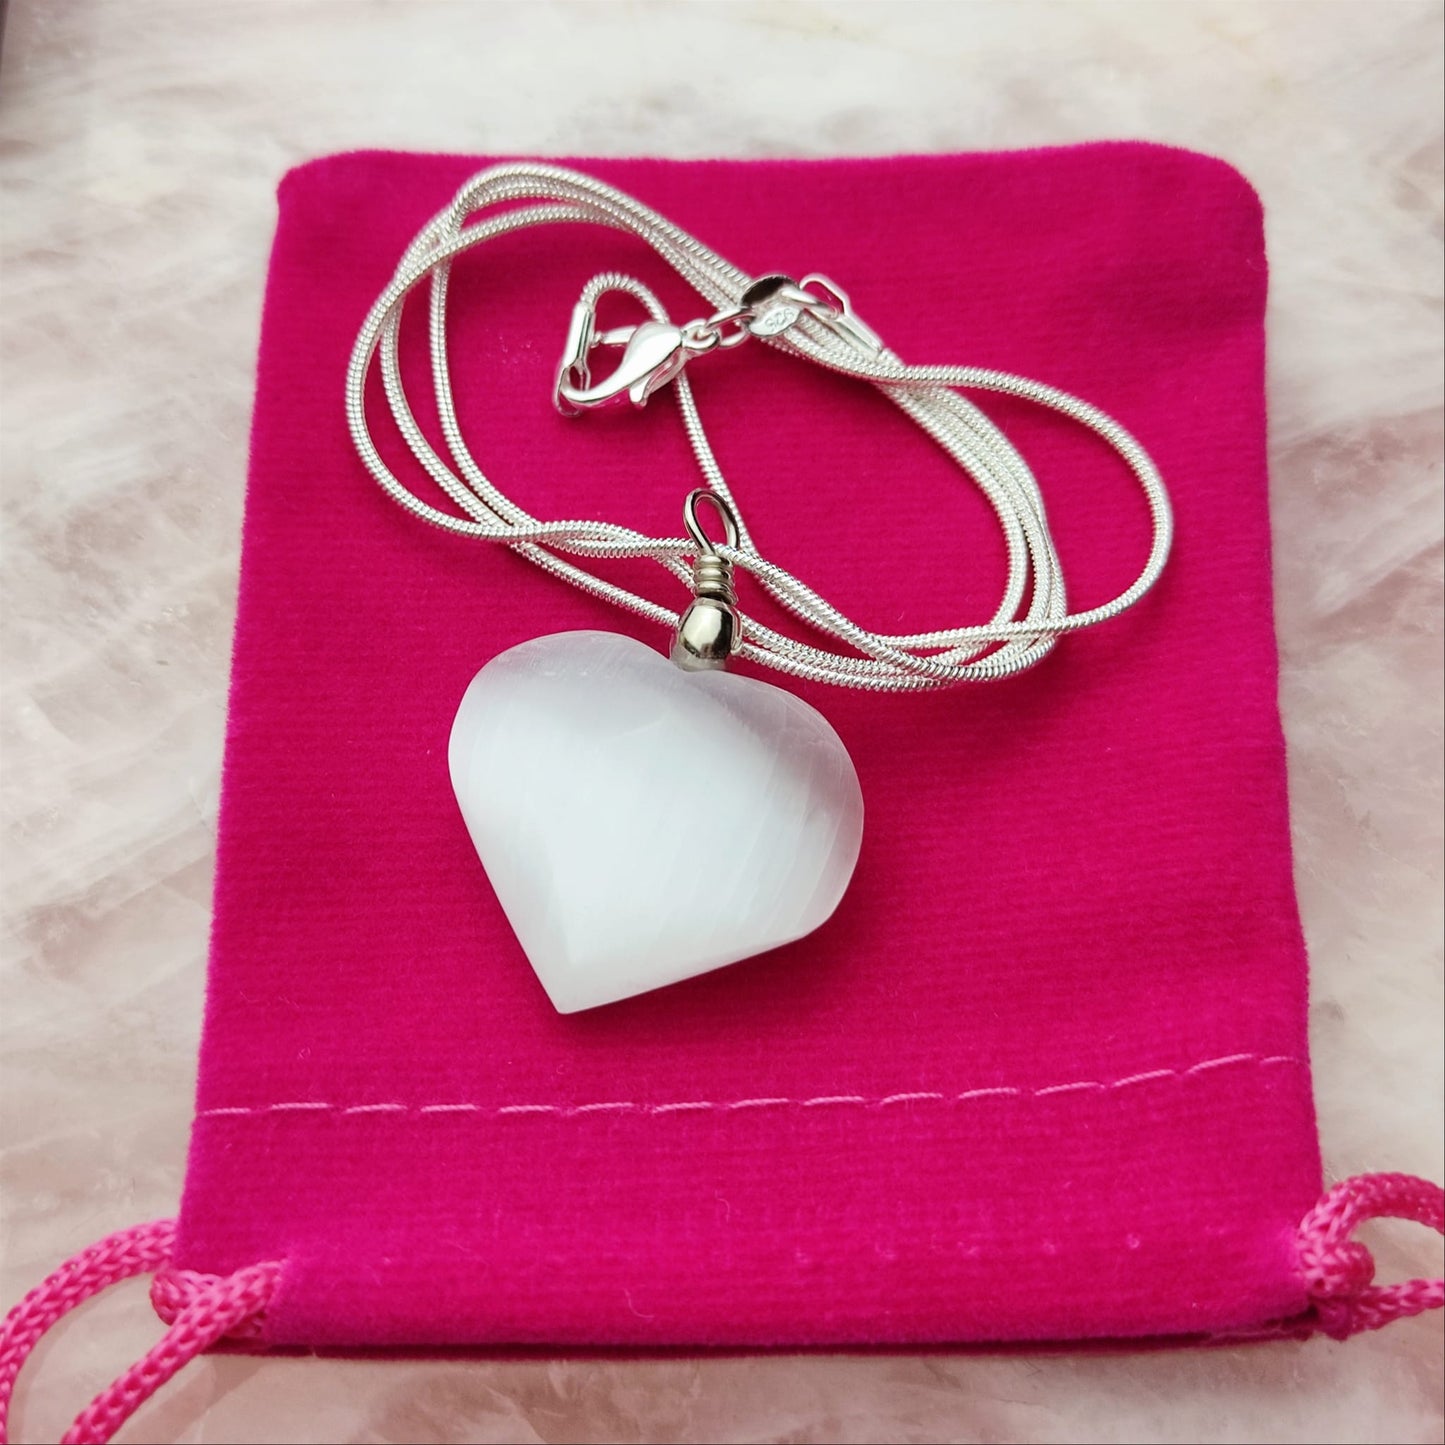 Heart Selenite Gemstone Pendant With 20" Silver Plated Snake Necklace Chain Gift